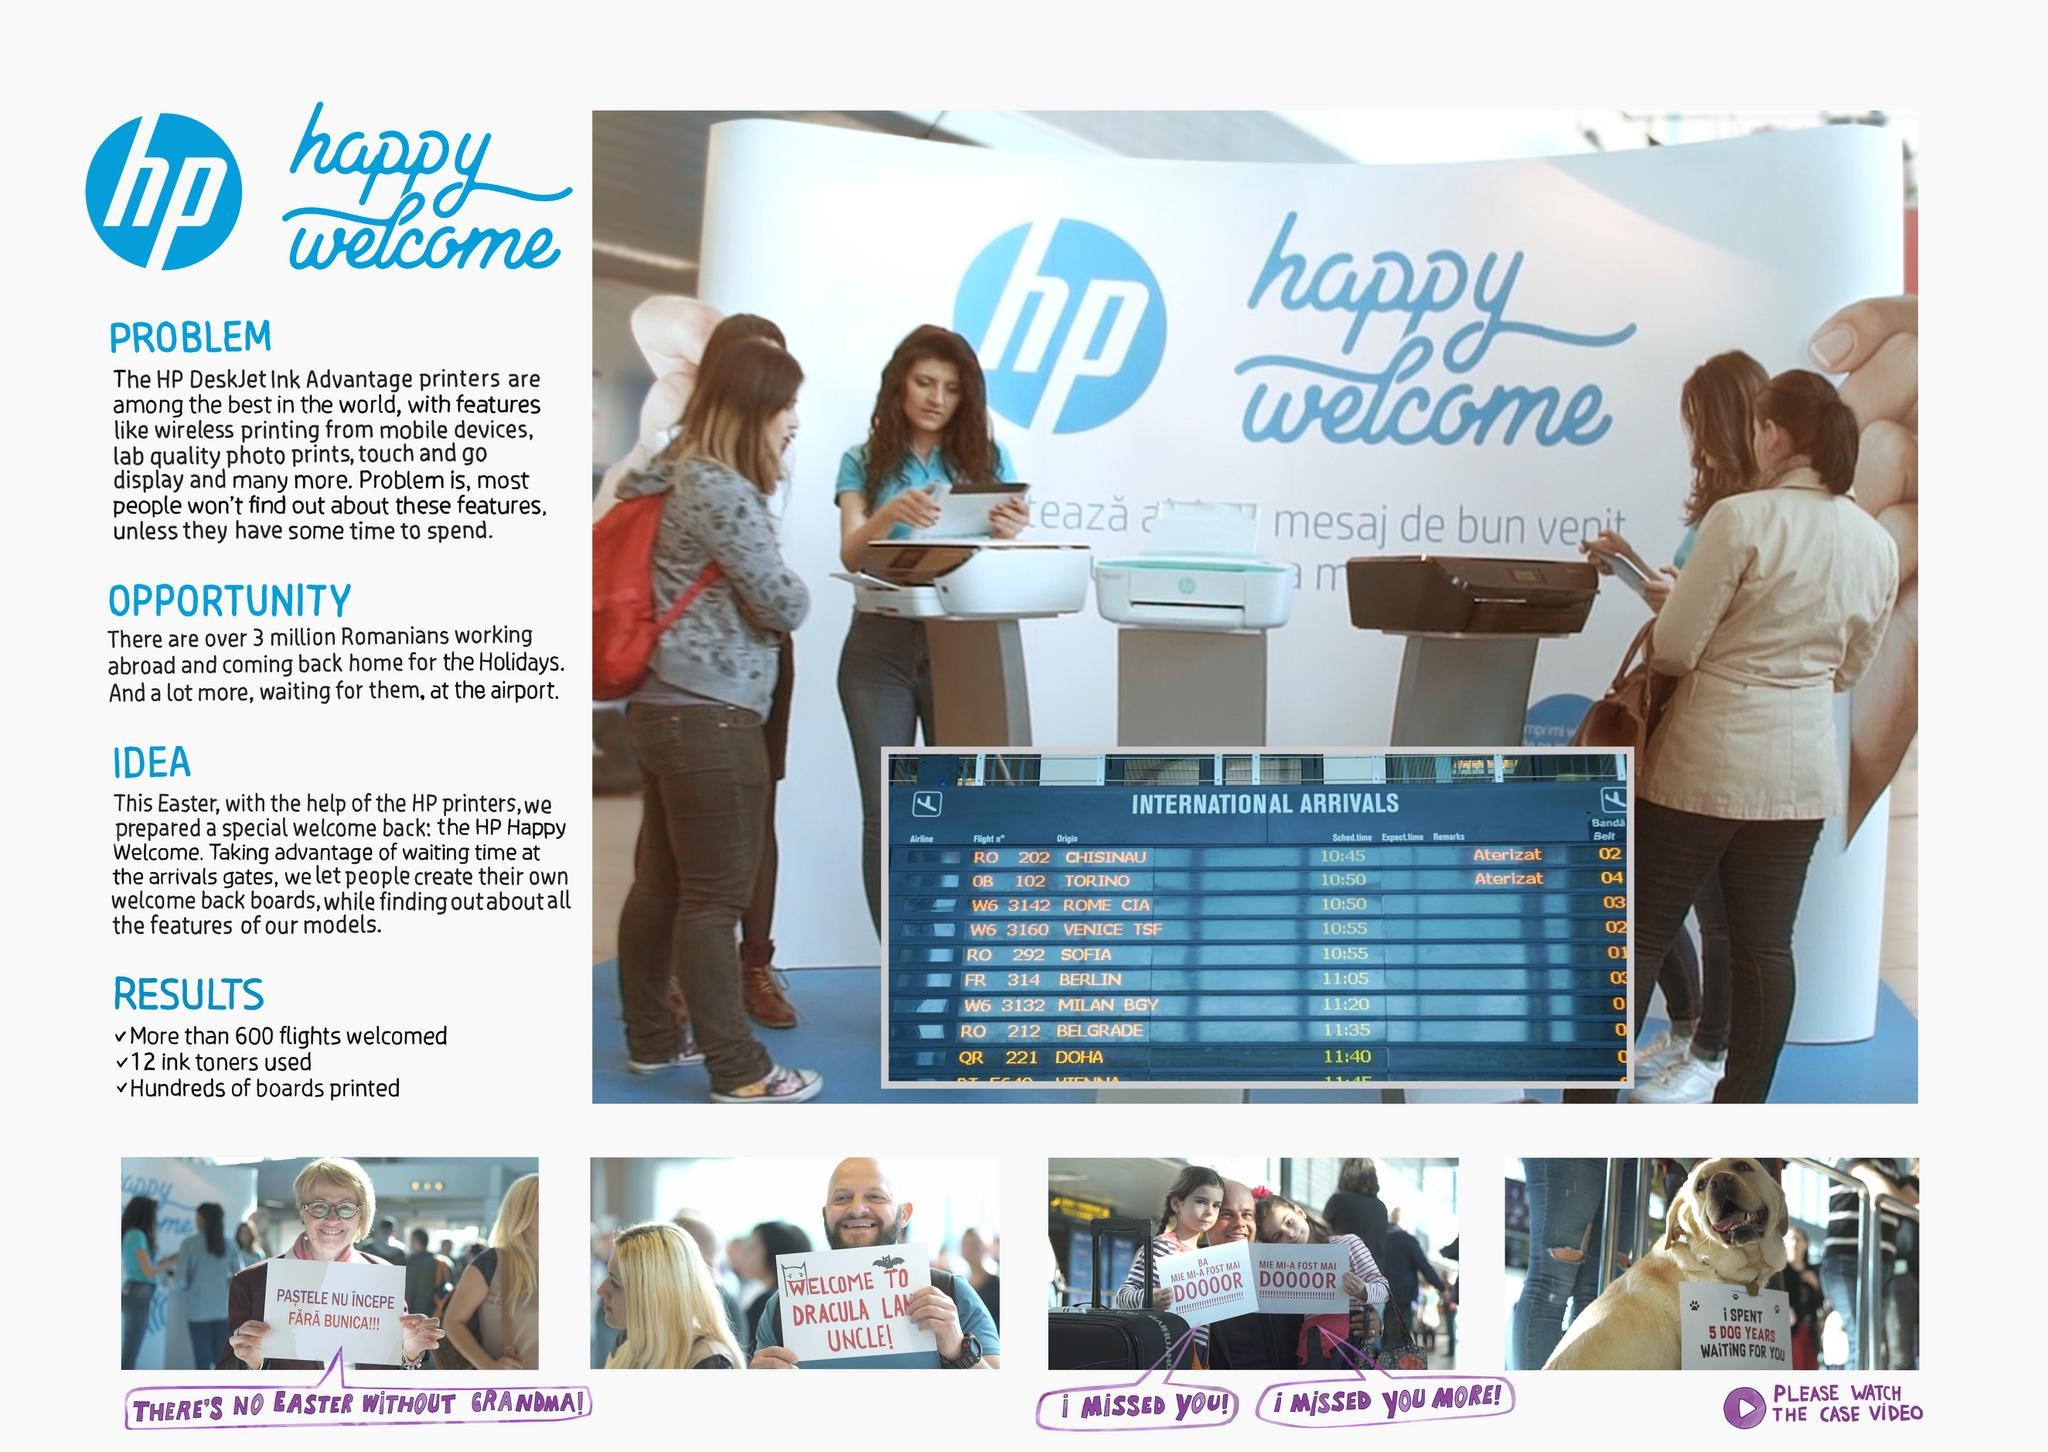 The HP Happy Welcome